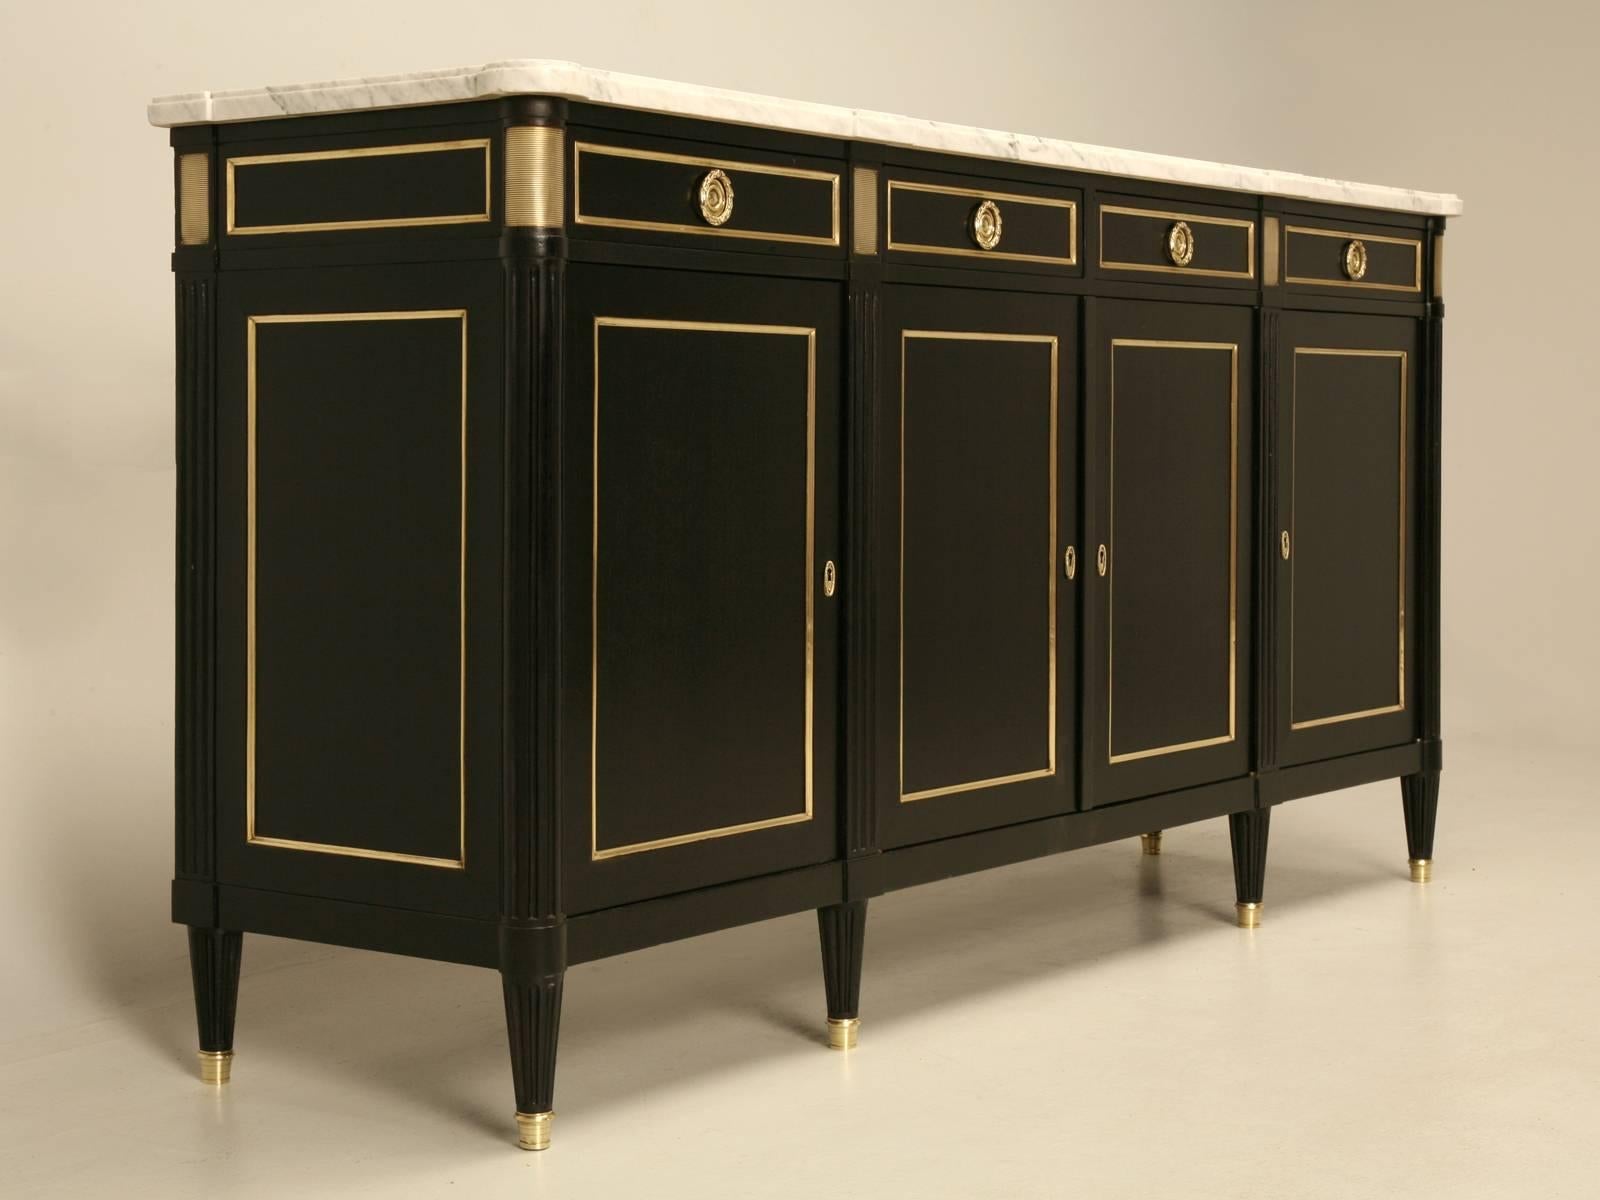 Maison Jansen inspired French Louis XVI buffet that our craftsmen restored to a very high standard, in a traditional ebonized finish which still allows for the grain of the mahogany to show through. This is not one of those typical quickie black